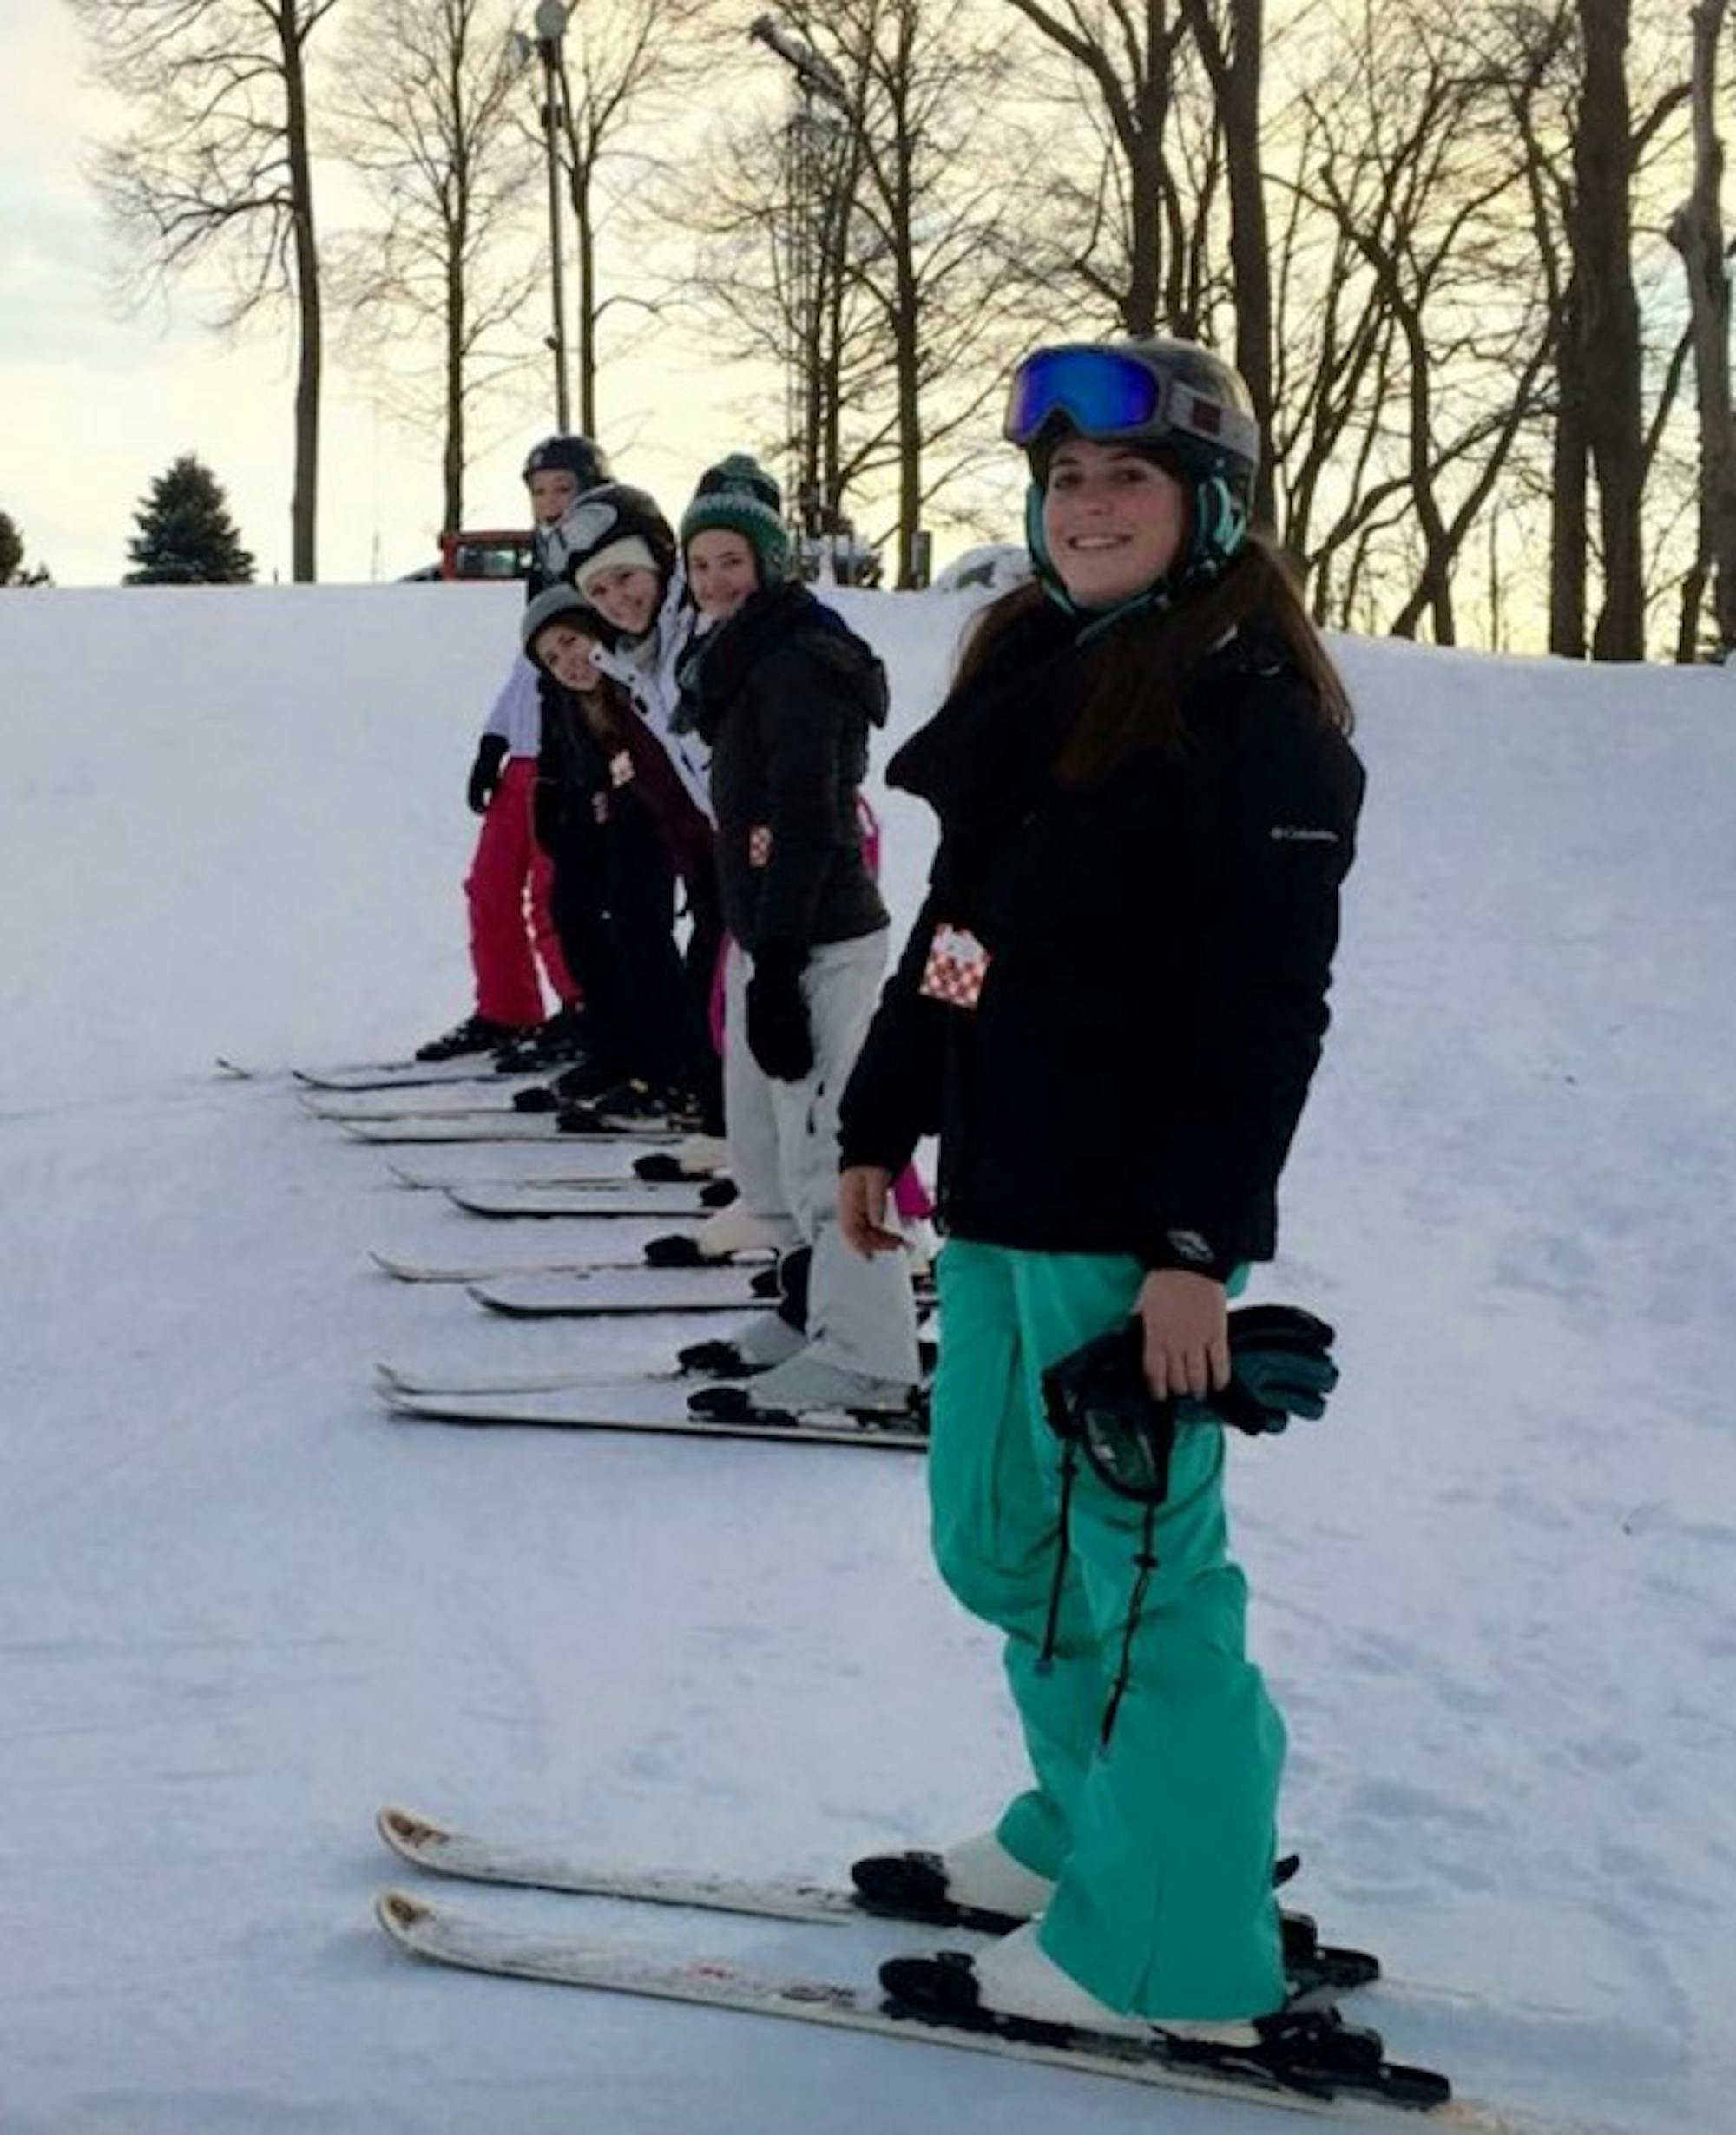 Members of the Saint Mary’s SnowBelles club ski and snowboard at Swss Valley Ski Resort in Jones,  Michigan. Lissa Stachnik, president and founder of the SnowBelles, said the club goes there once a week.